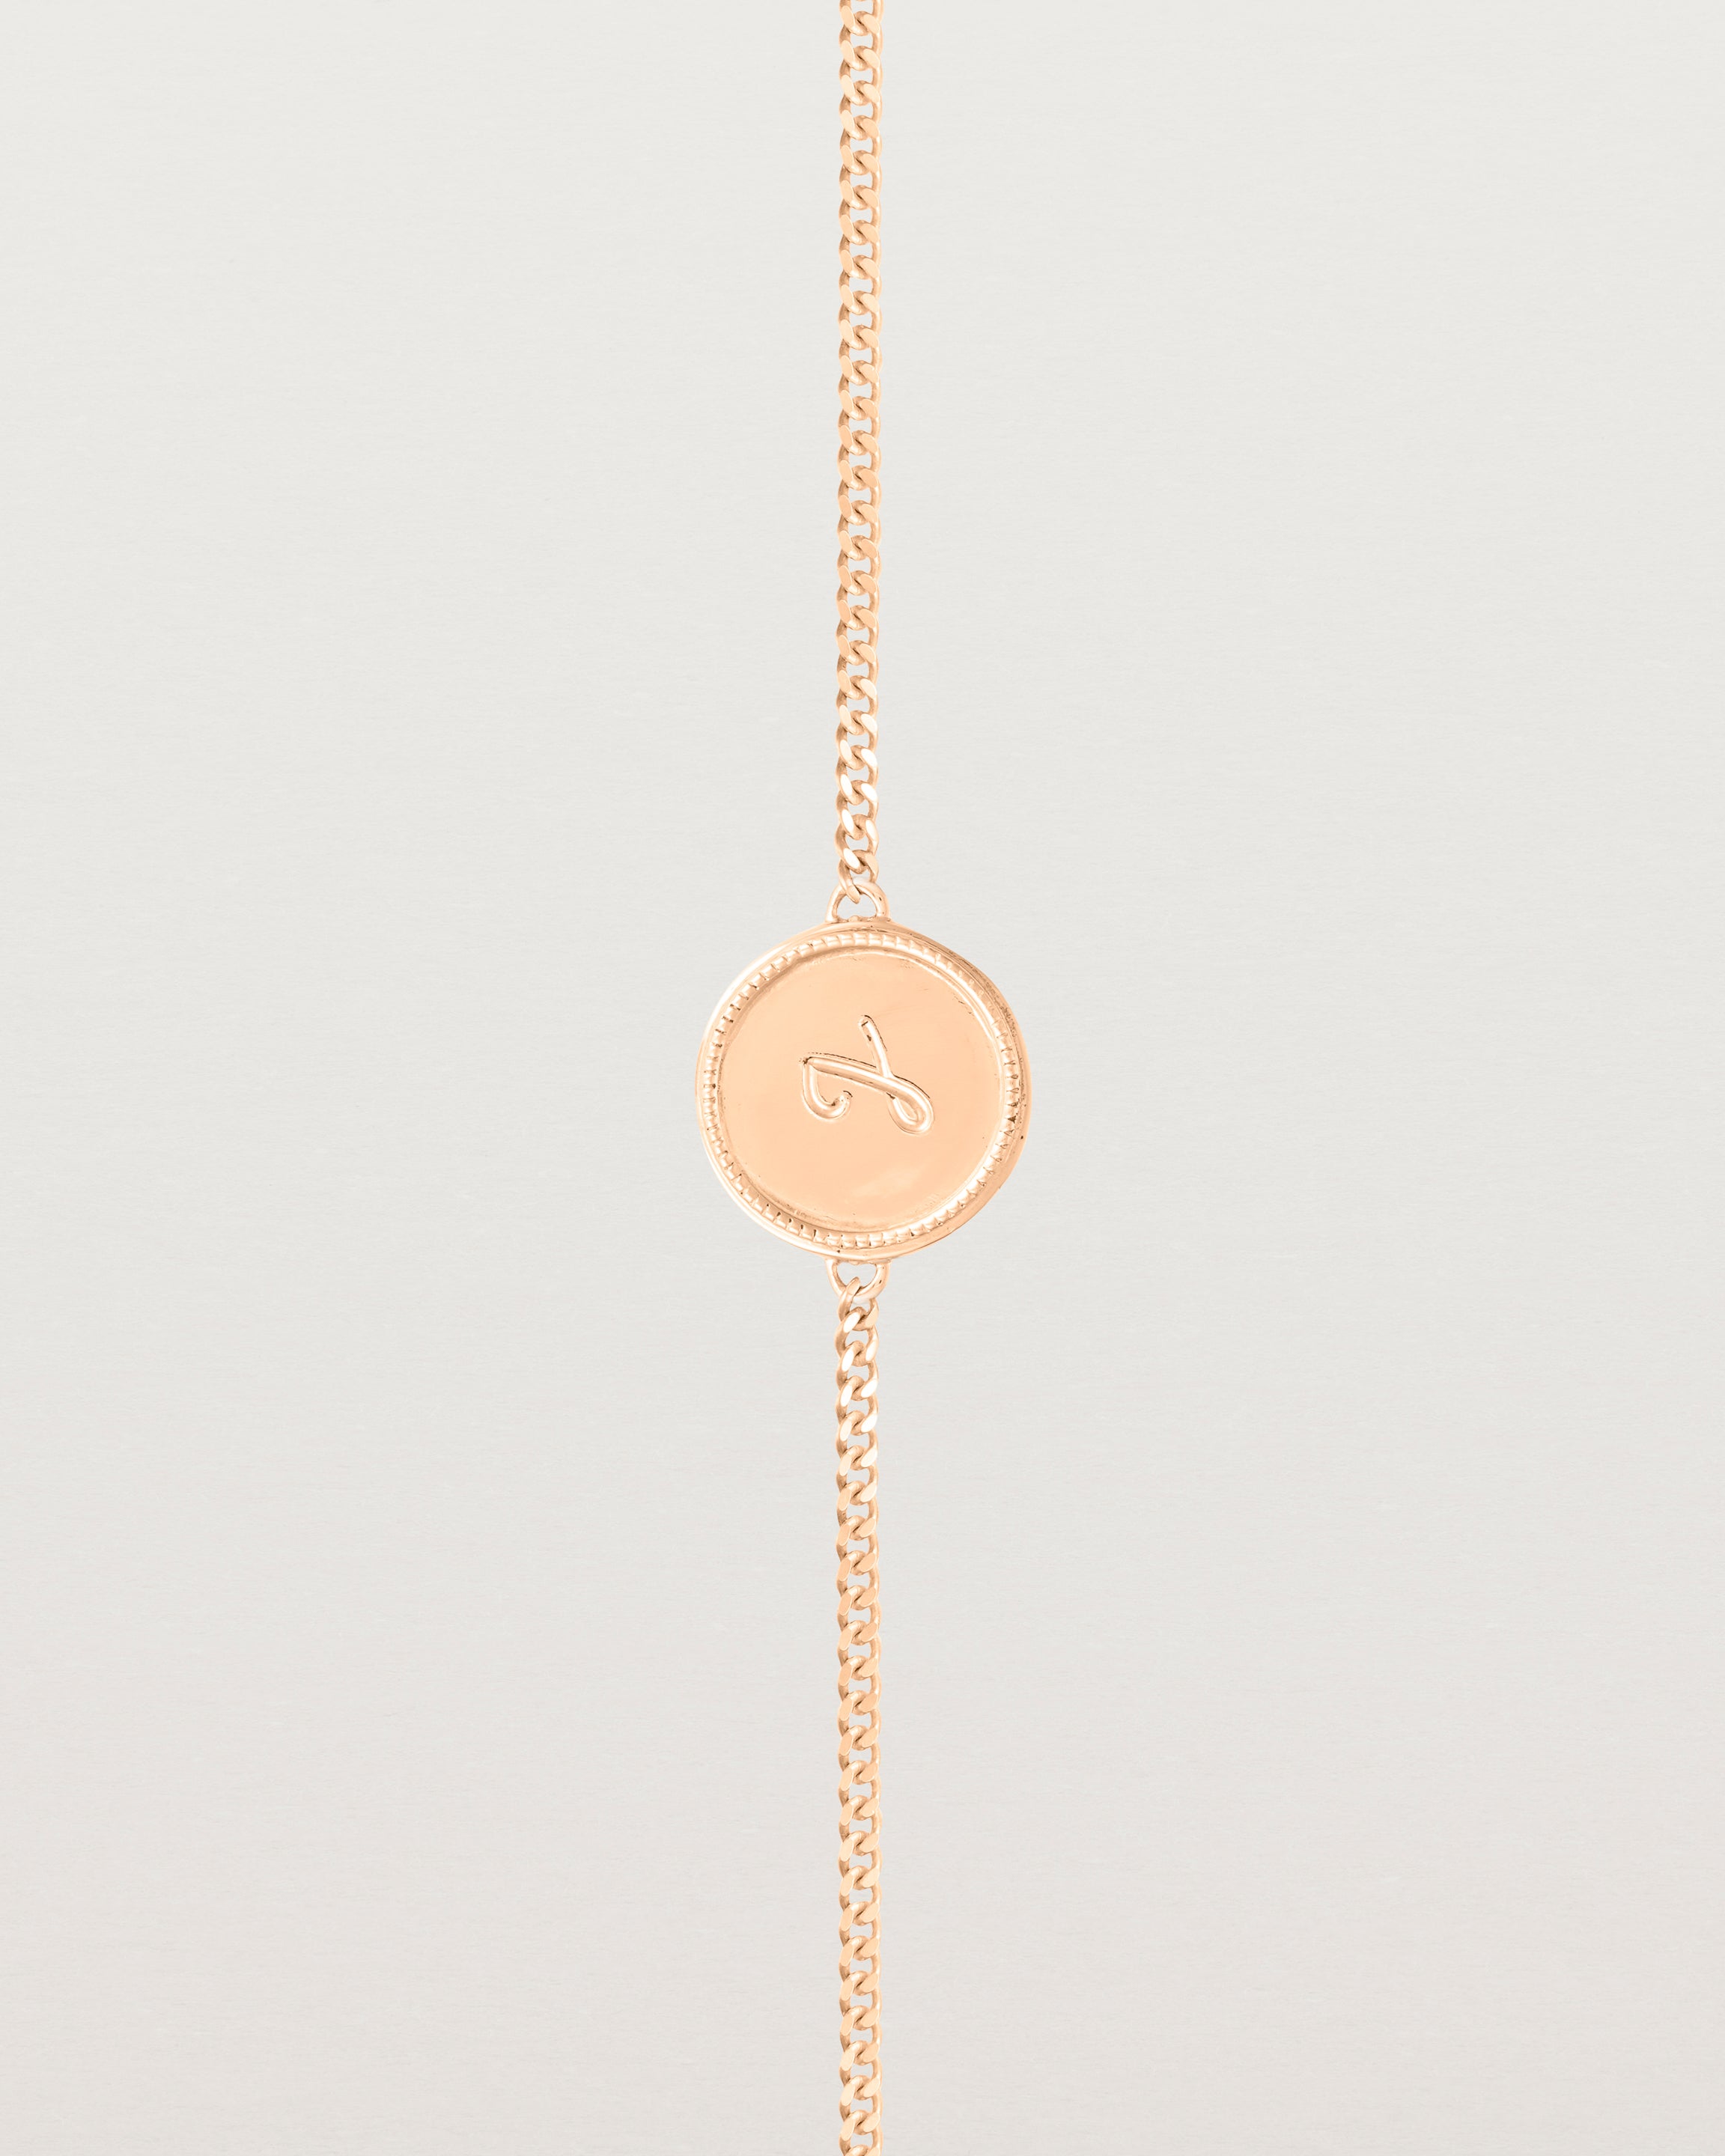 Close up view of the Precious Initial Bracelet in rose gold.